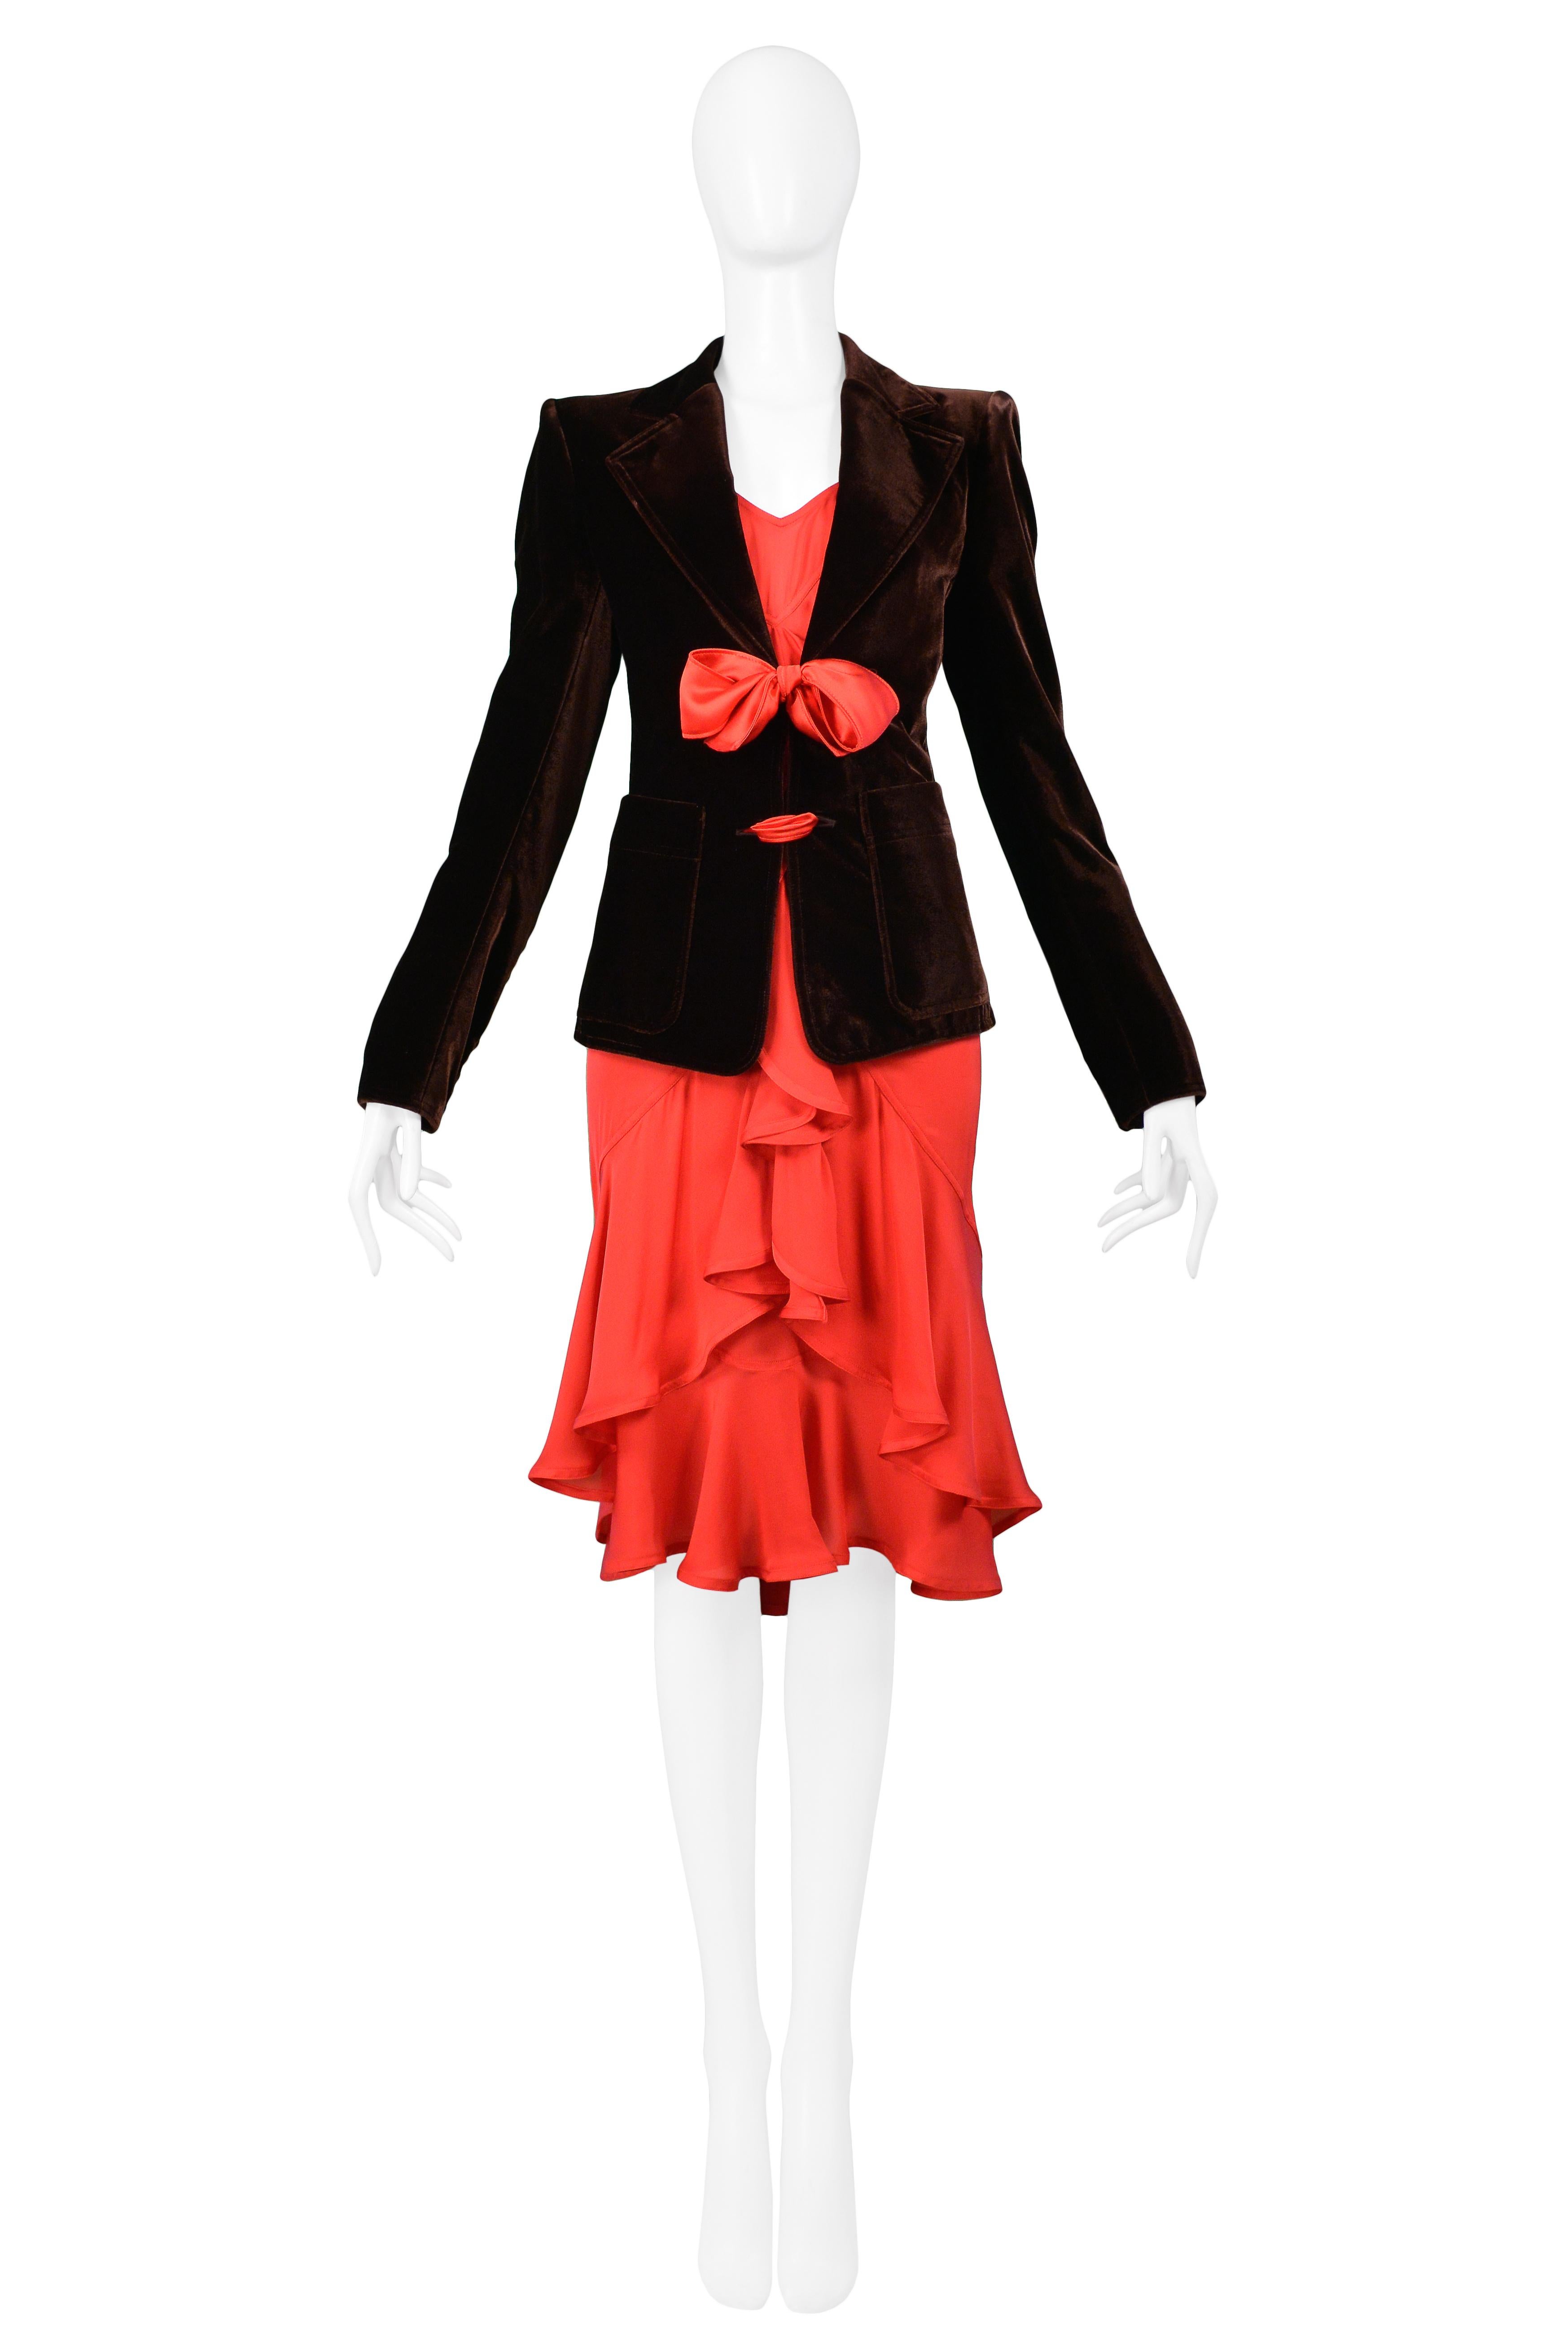 We are pleased to offer a vintage Tom Ford for Yves Saint Laurent brown velvet blazer and red cocktail dress ensemble. The classic velvet dinner jacket features a fitted body, patch pockets, and red sash tie front closure. The silk-like jersey dress